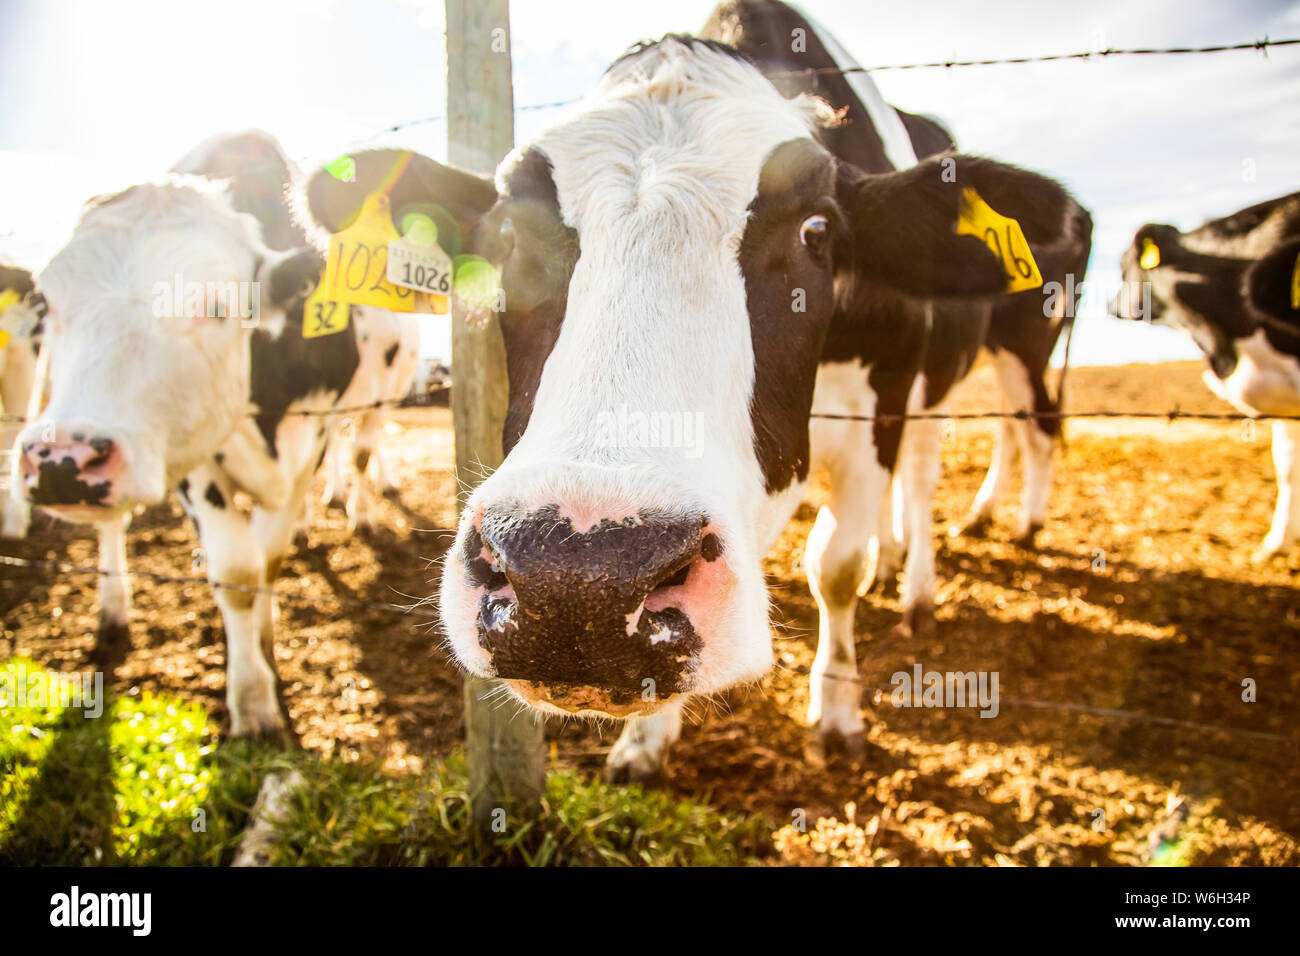 Two Holstein cows standing at a barb wire fence looking curiously at the camera with identification tags in their ears at a robotic dairy farm, Nor... Stock Photo